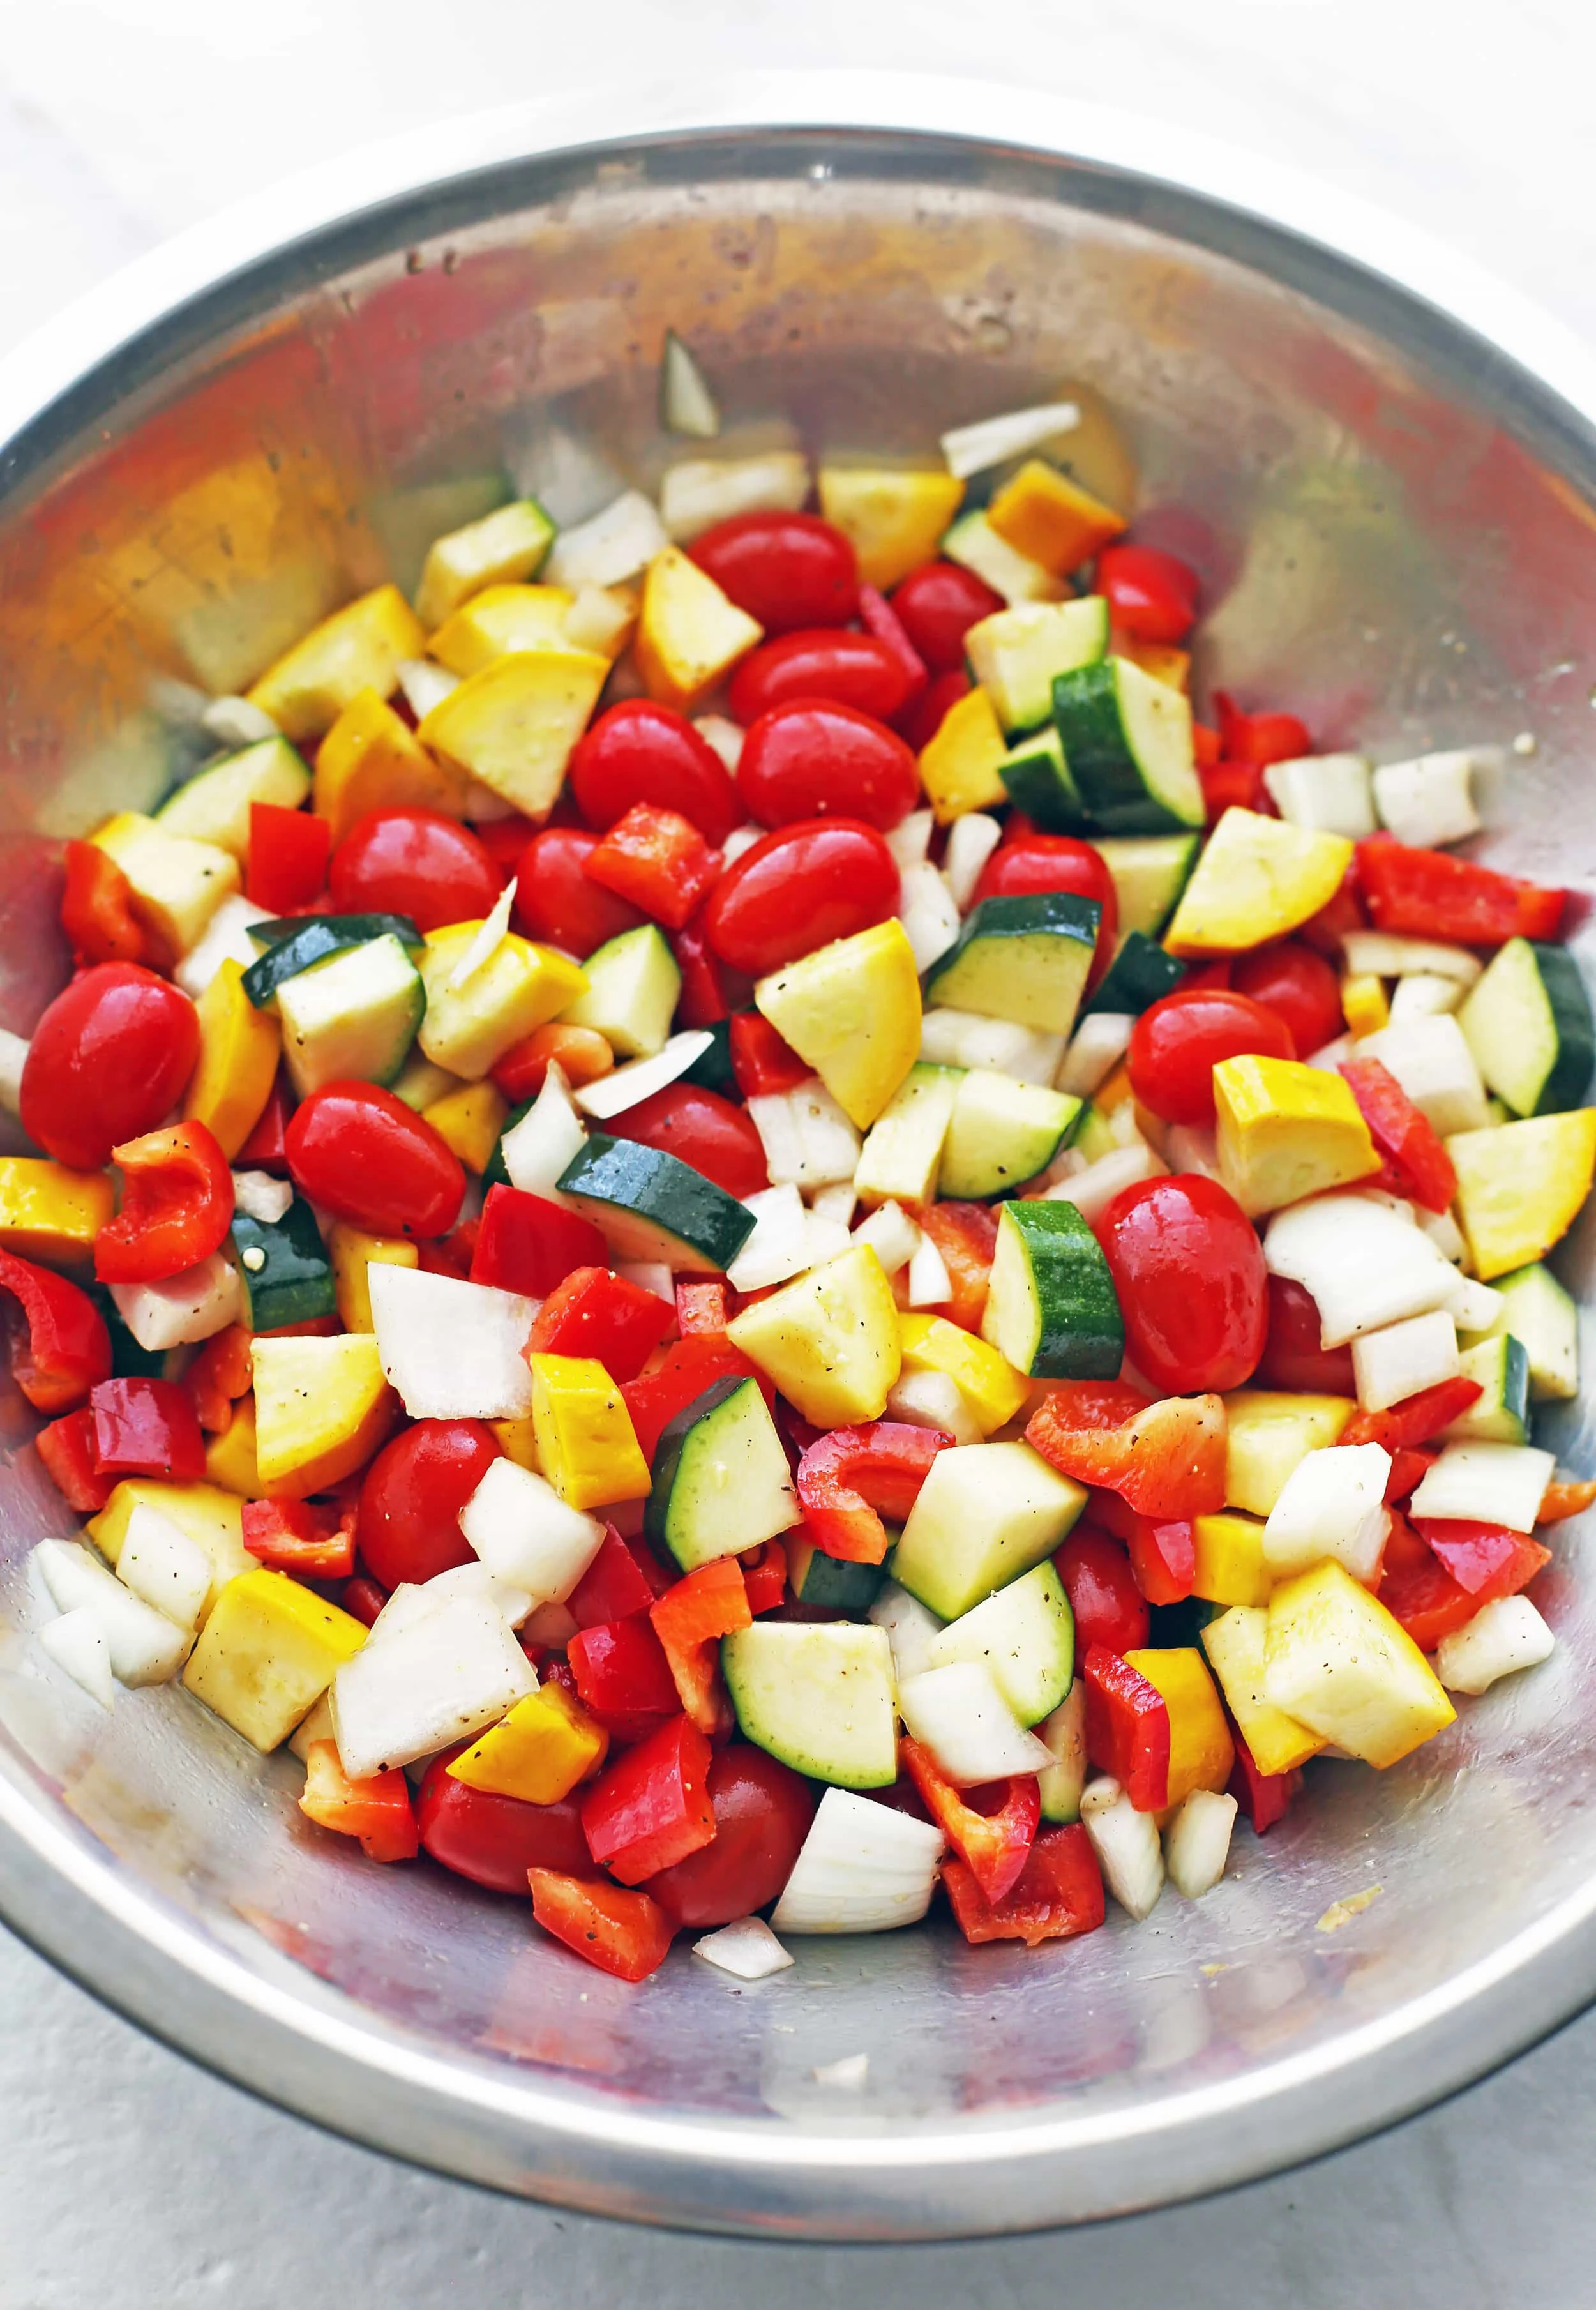 A large metal bowl containing grape tomatoes and chopped zucchini, yellow squash, bell peppers, and onions.